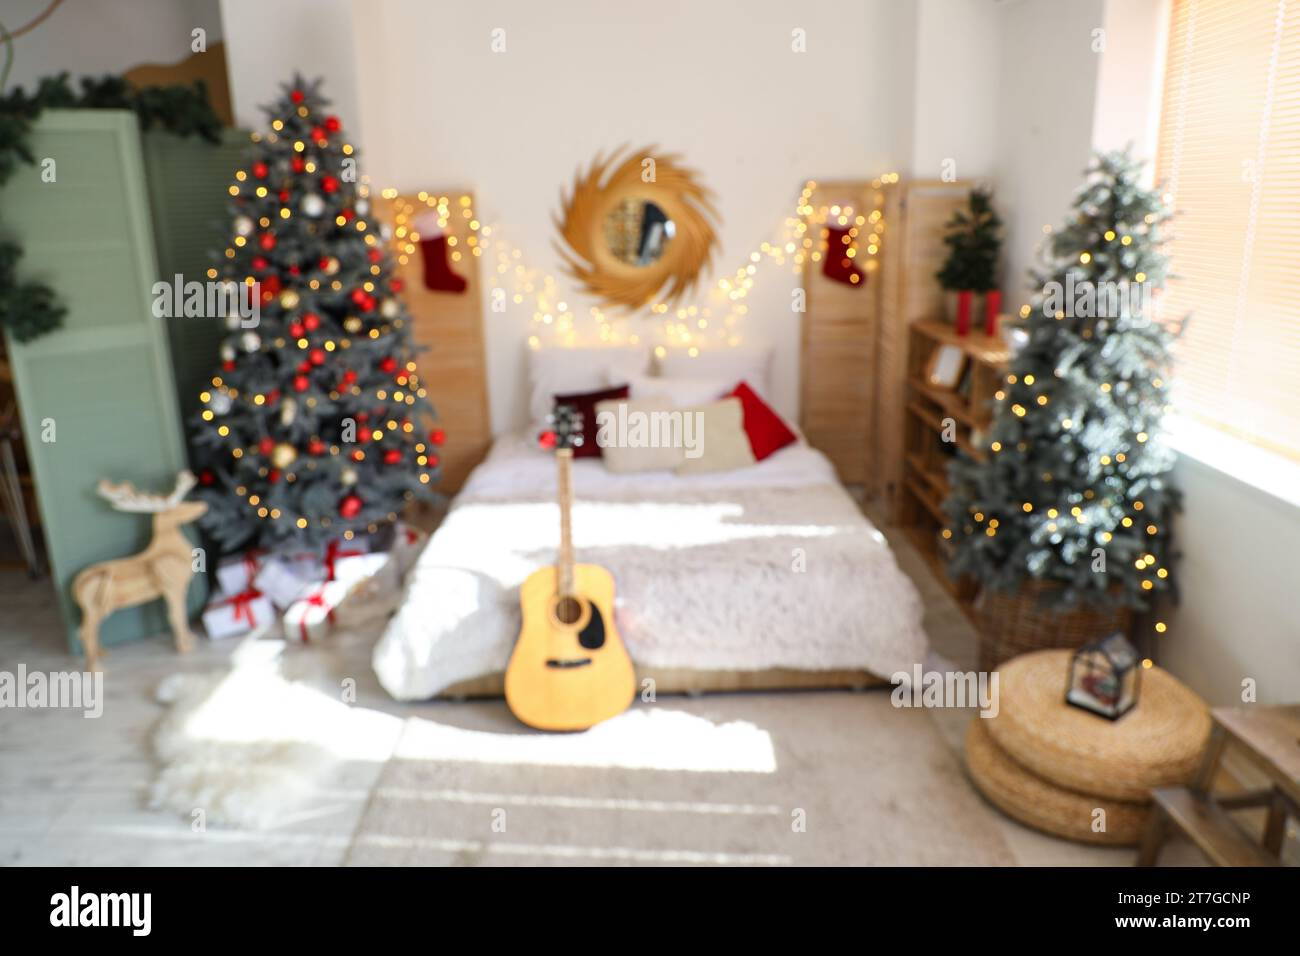 Cozy Christmas bedroom interior with decorated fir trees and guitar Stock Photo